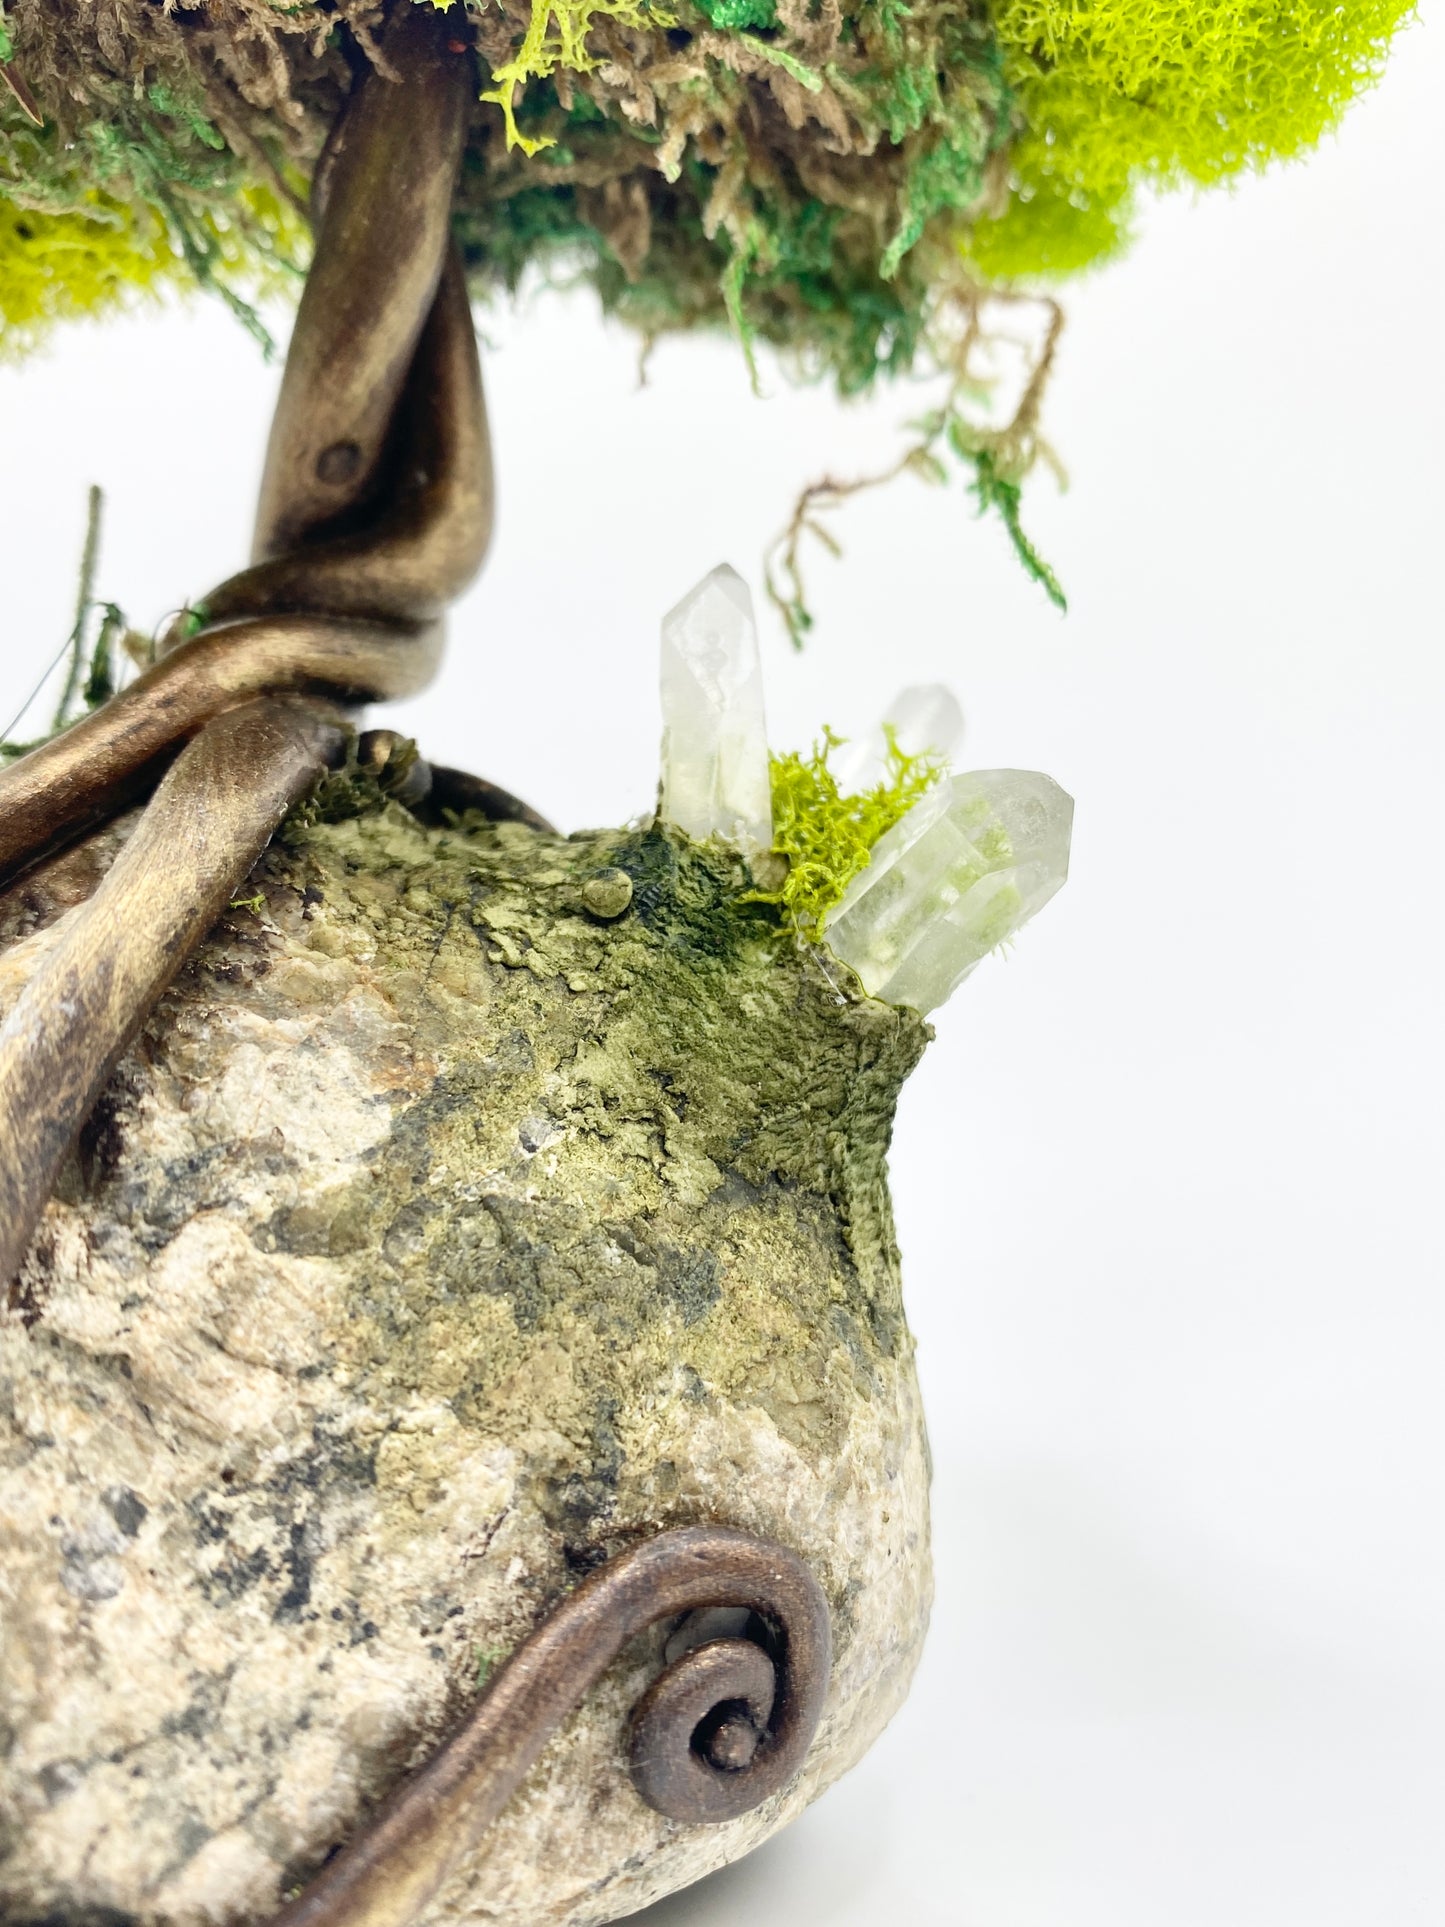 Tree of Life Sculpture: Clay, Stone and Moss Sculpture with Boulder and 3 Quartz Crystals - Inspired Home Decor